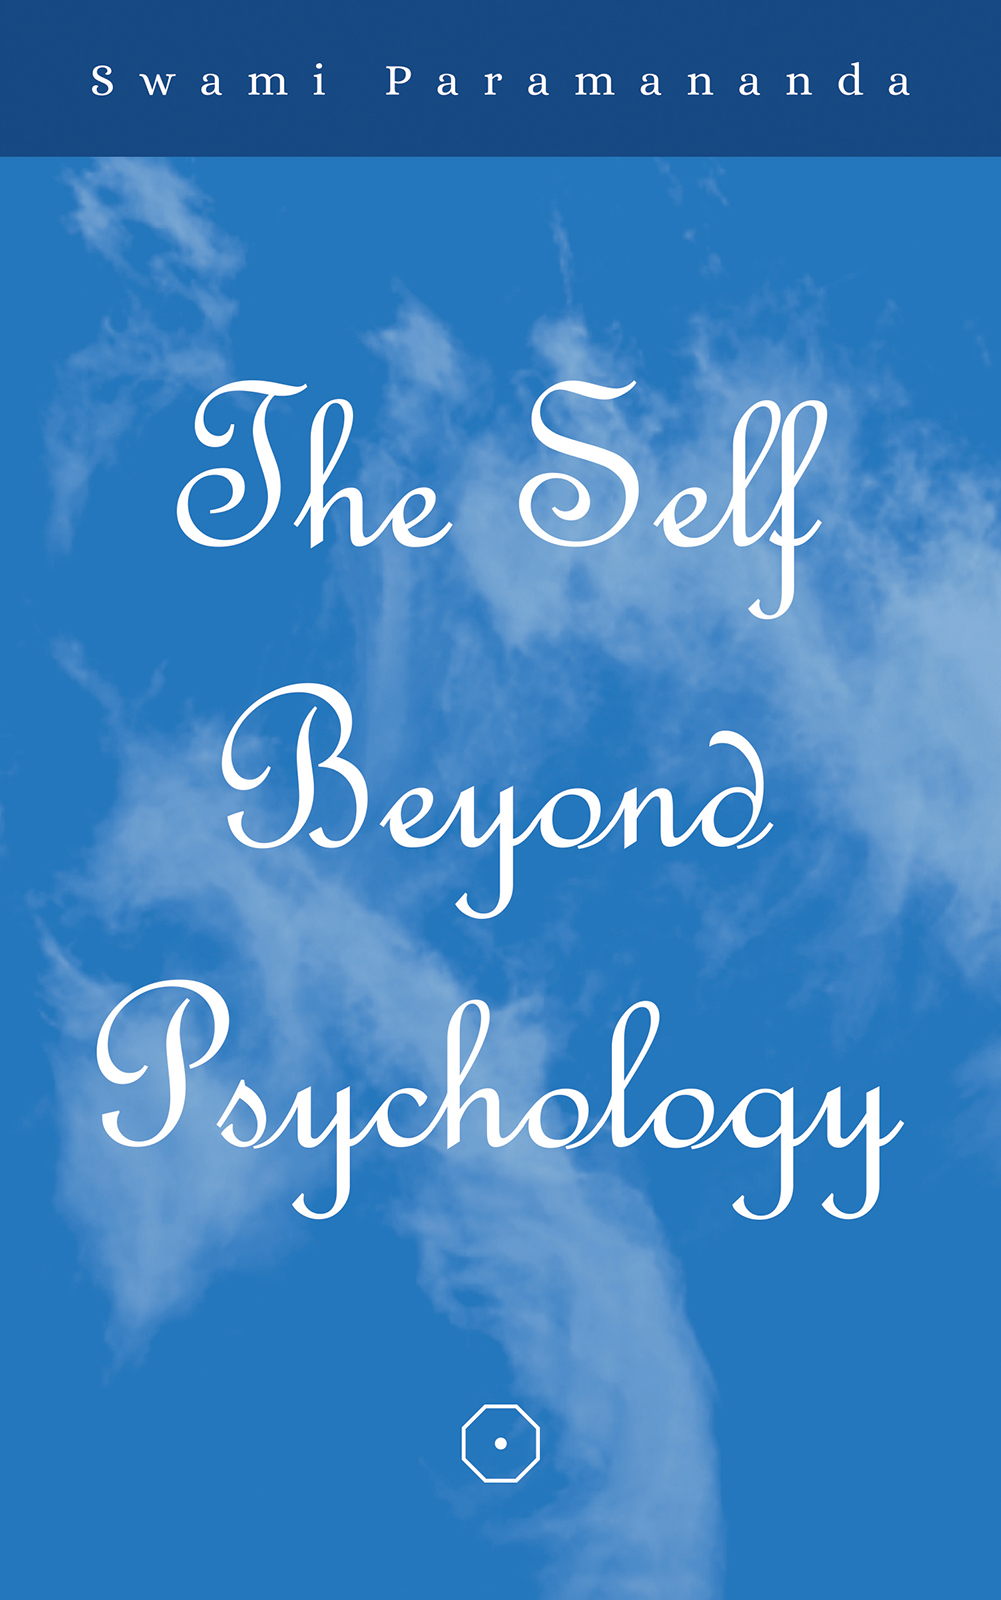 This image is the cover for the book The Self Beyond Psychology